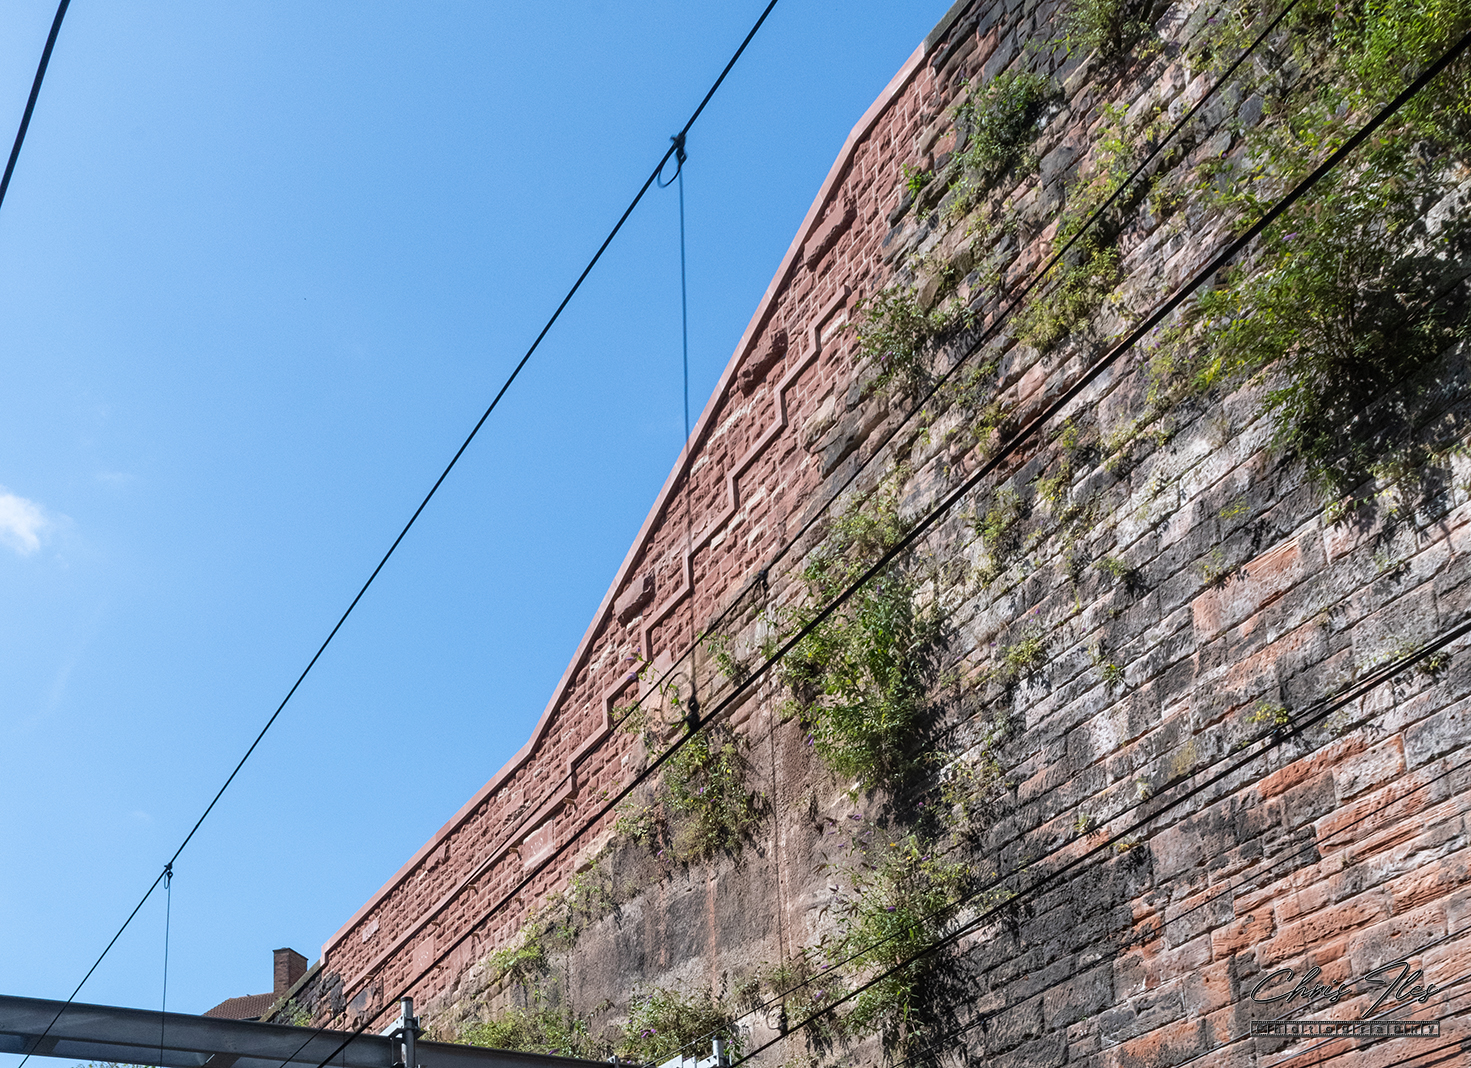 The repaired wall of the Lime Street to Edge Hill cutting, following collapse.